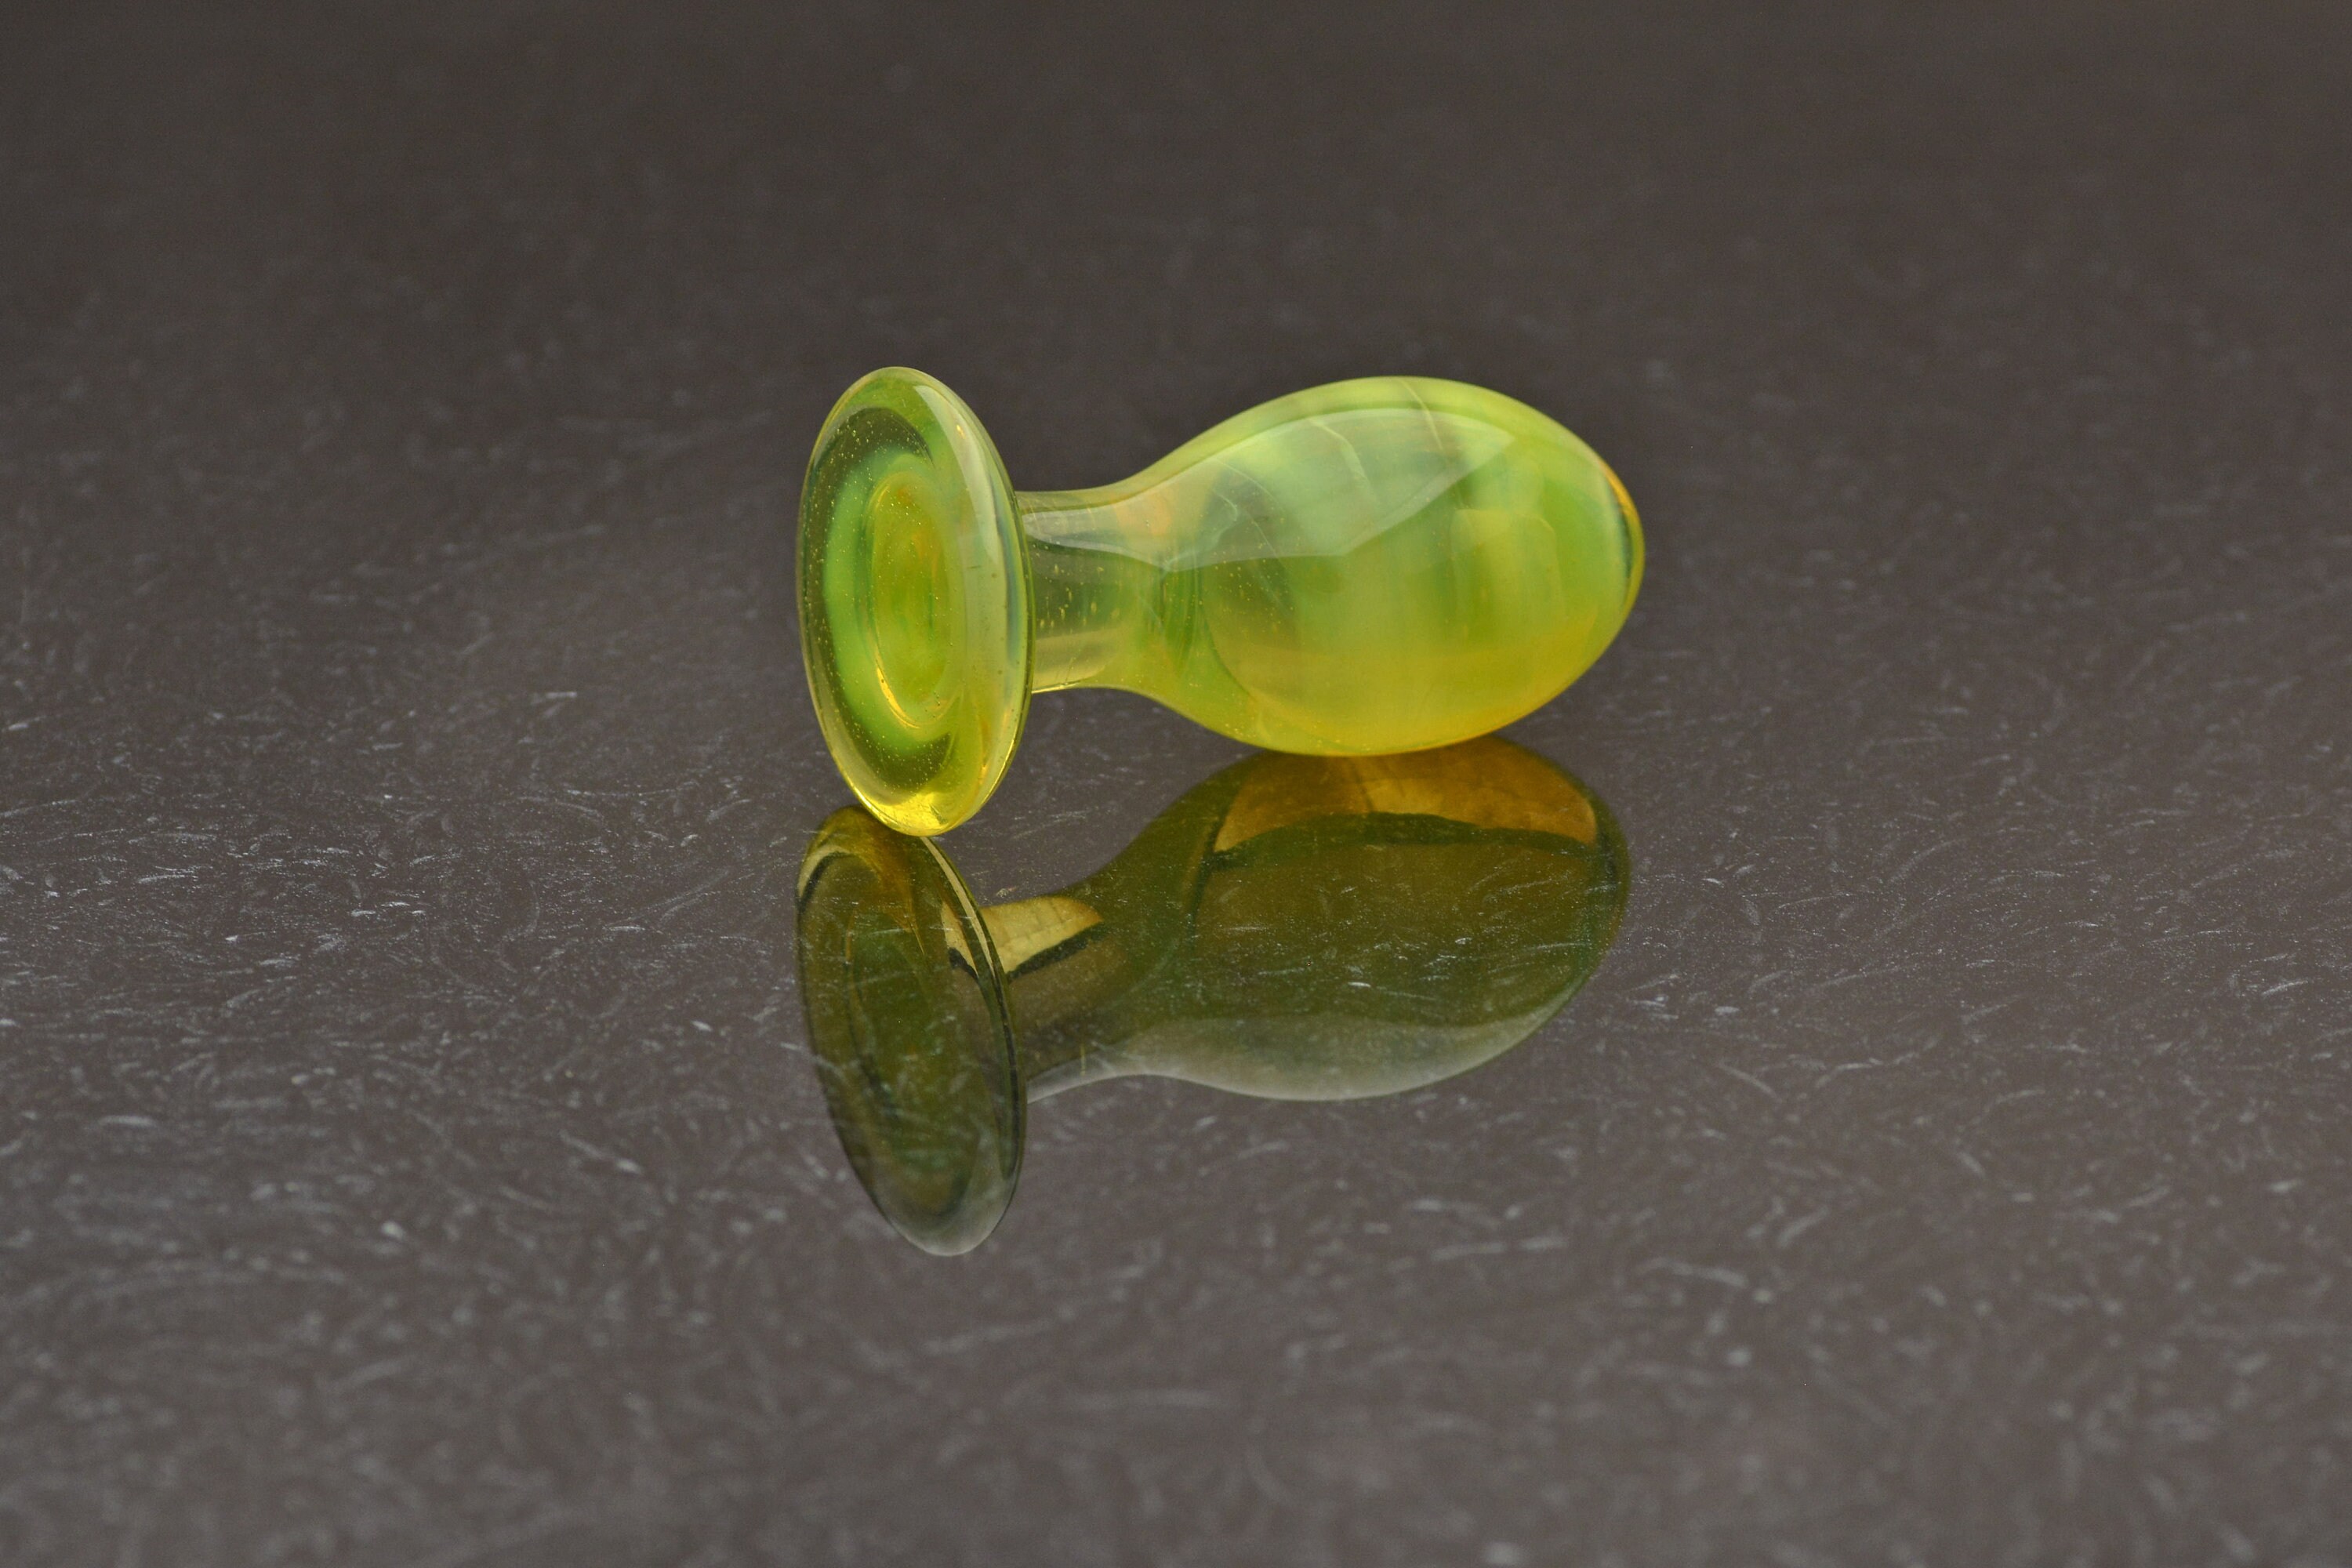 Glass Butt Plug Medium Vibrant Ectoplasm For Himher Anal Plug Luxury Sex Toy By Simply